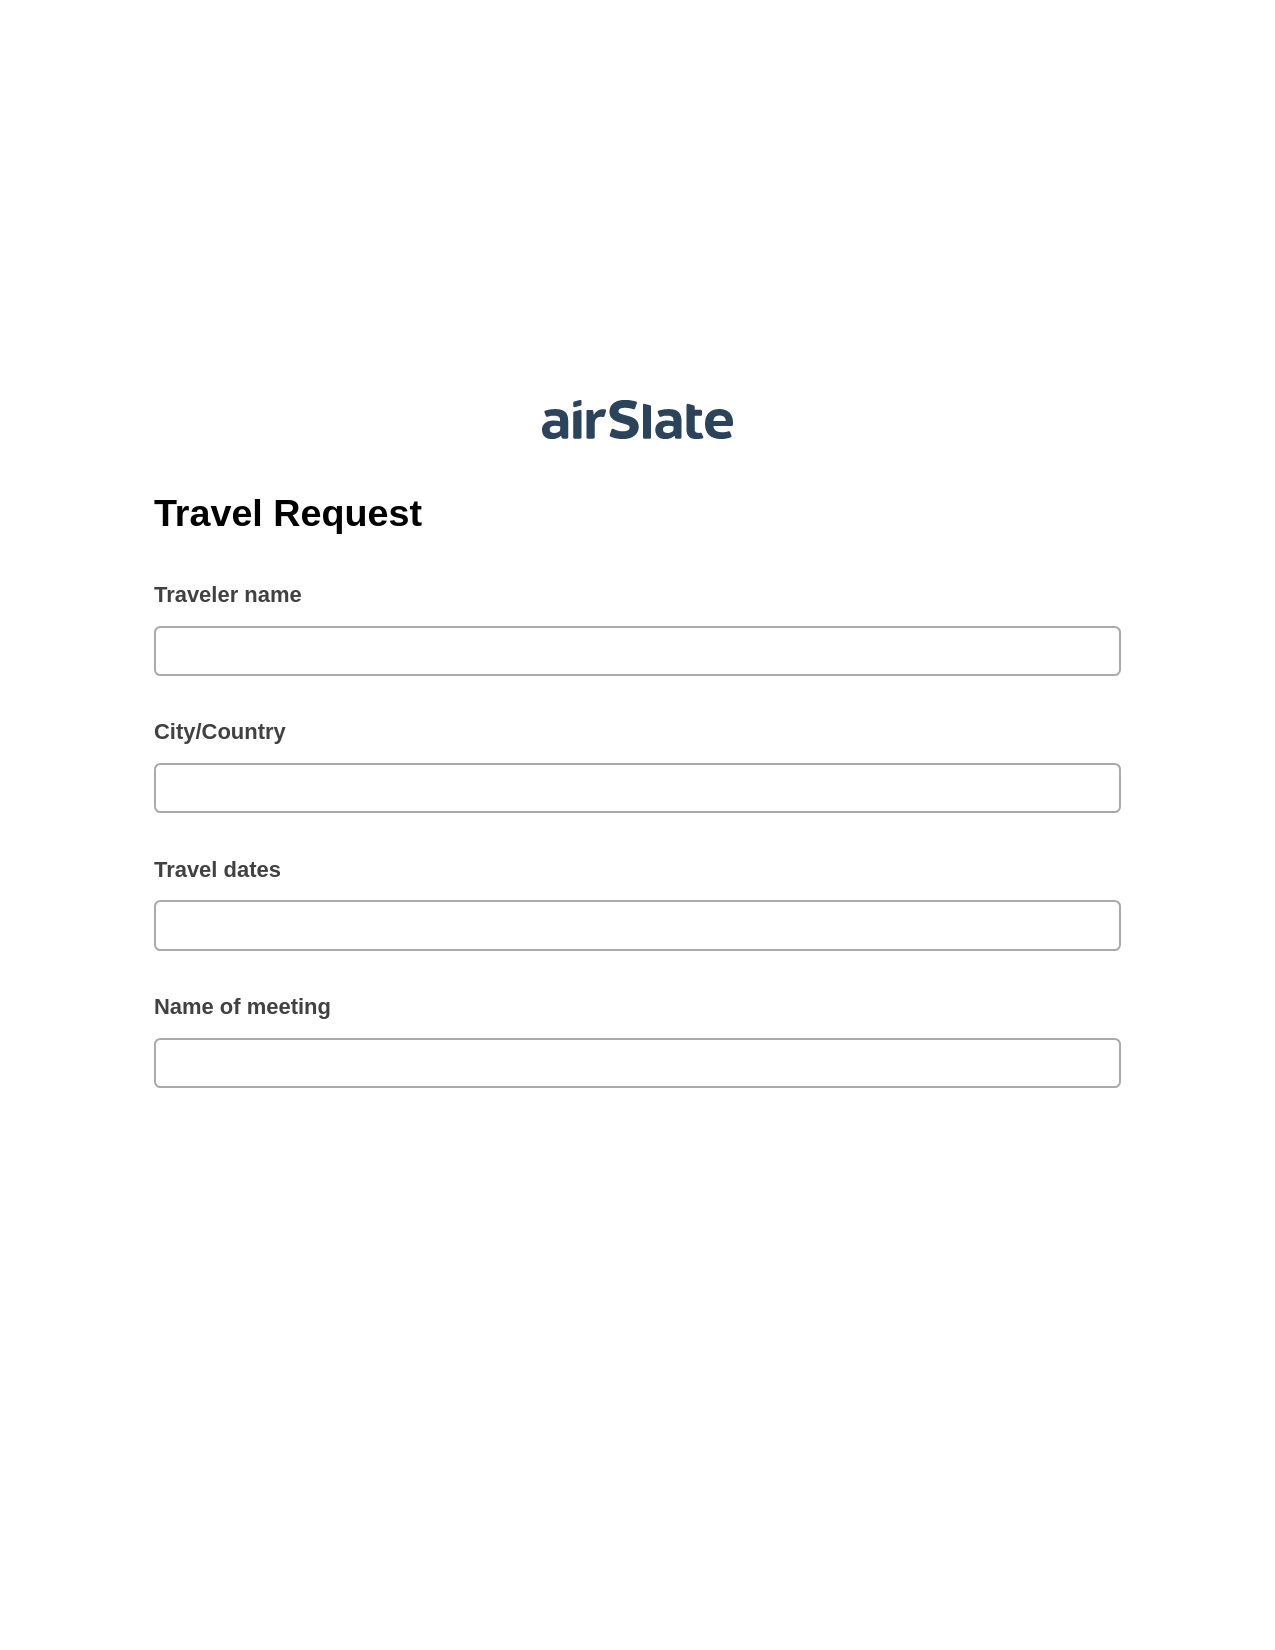 Travel Request Pre-fill Document Bot, Update MS Dynamics 365 Records Bot, OneDrive Bot